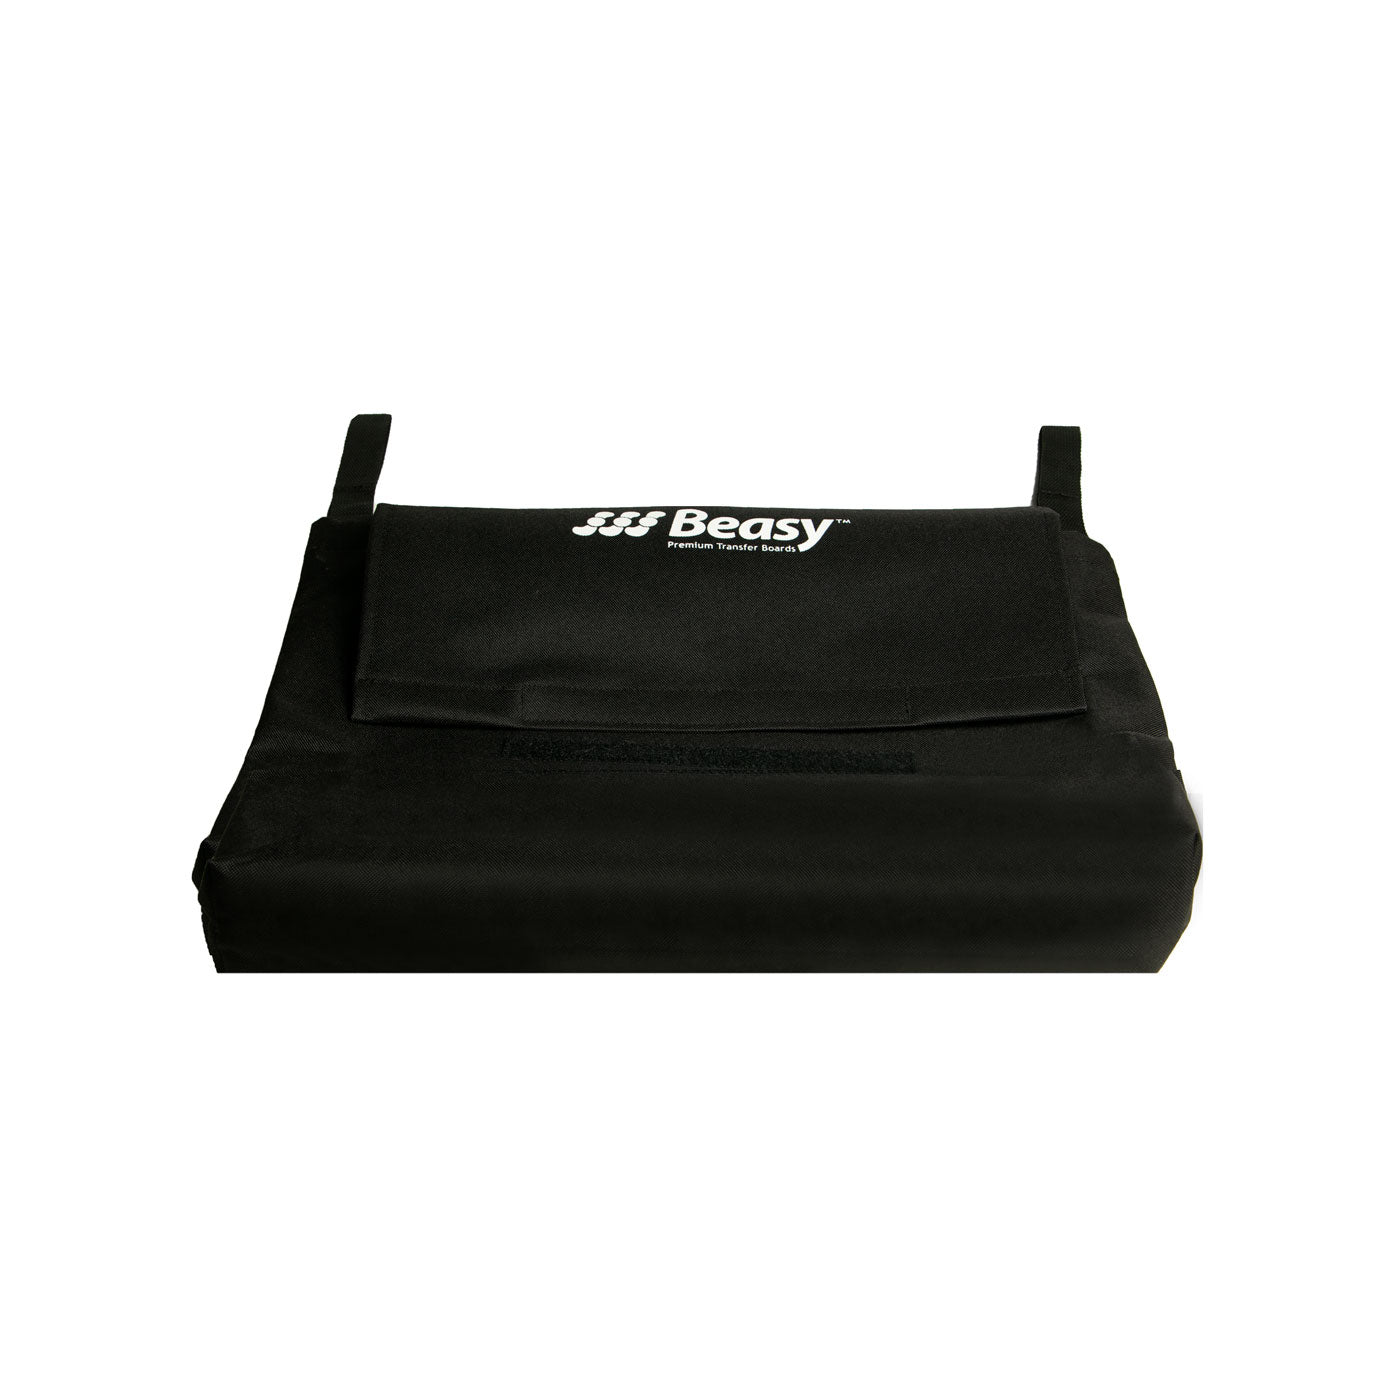 Beasy Transfer Boards Carrying Cases